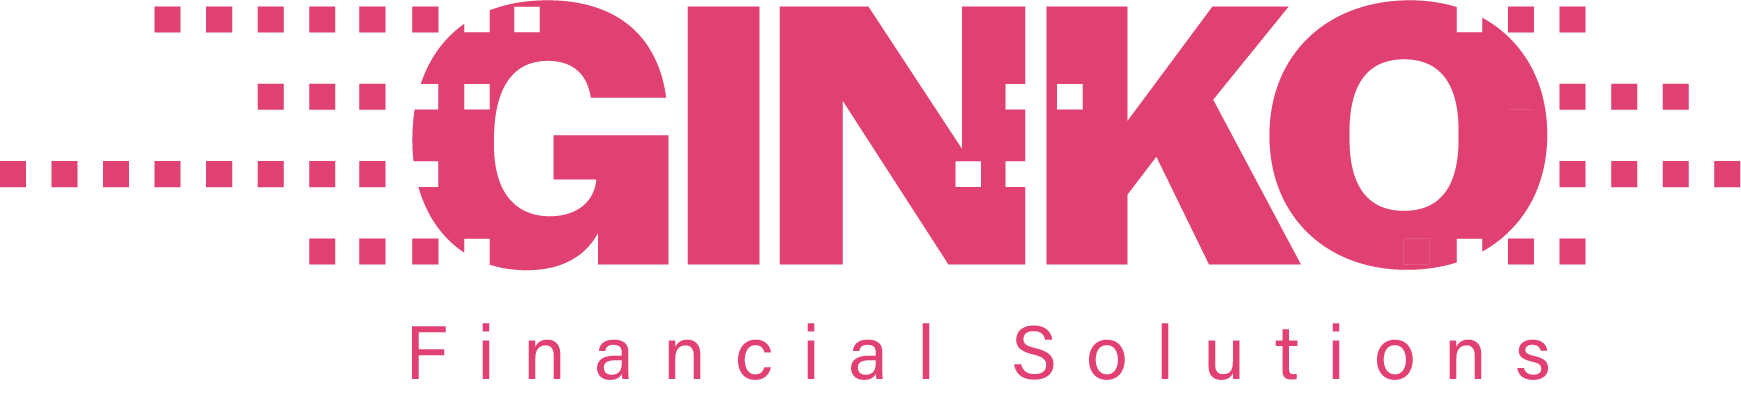 GINKO FINANCIAL SOLUTIONS